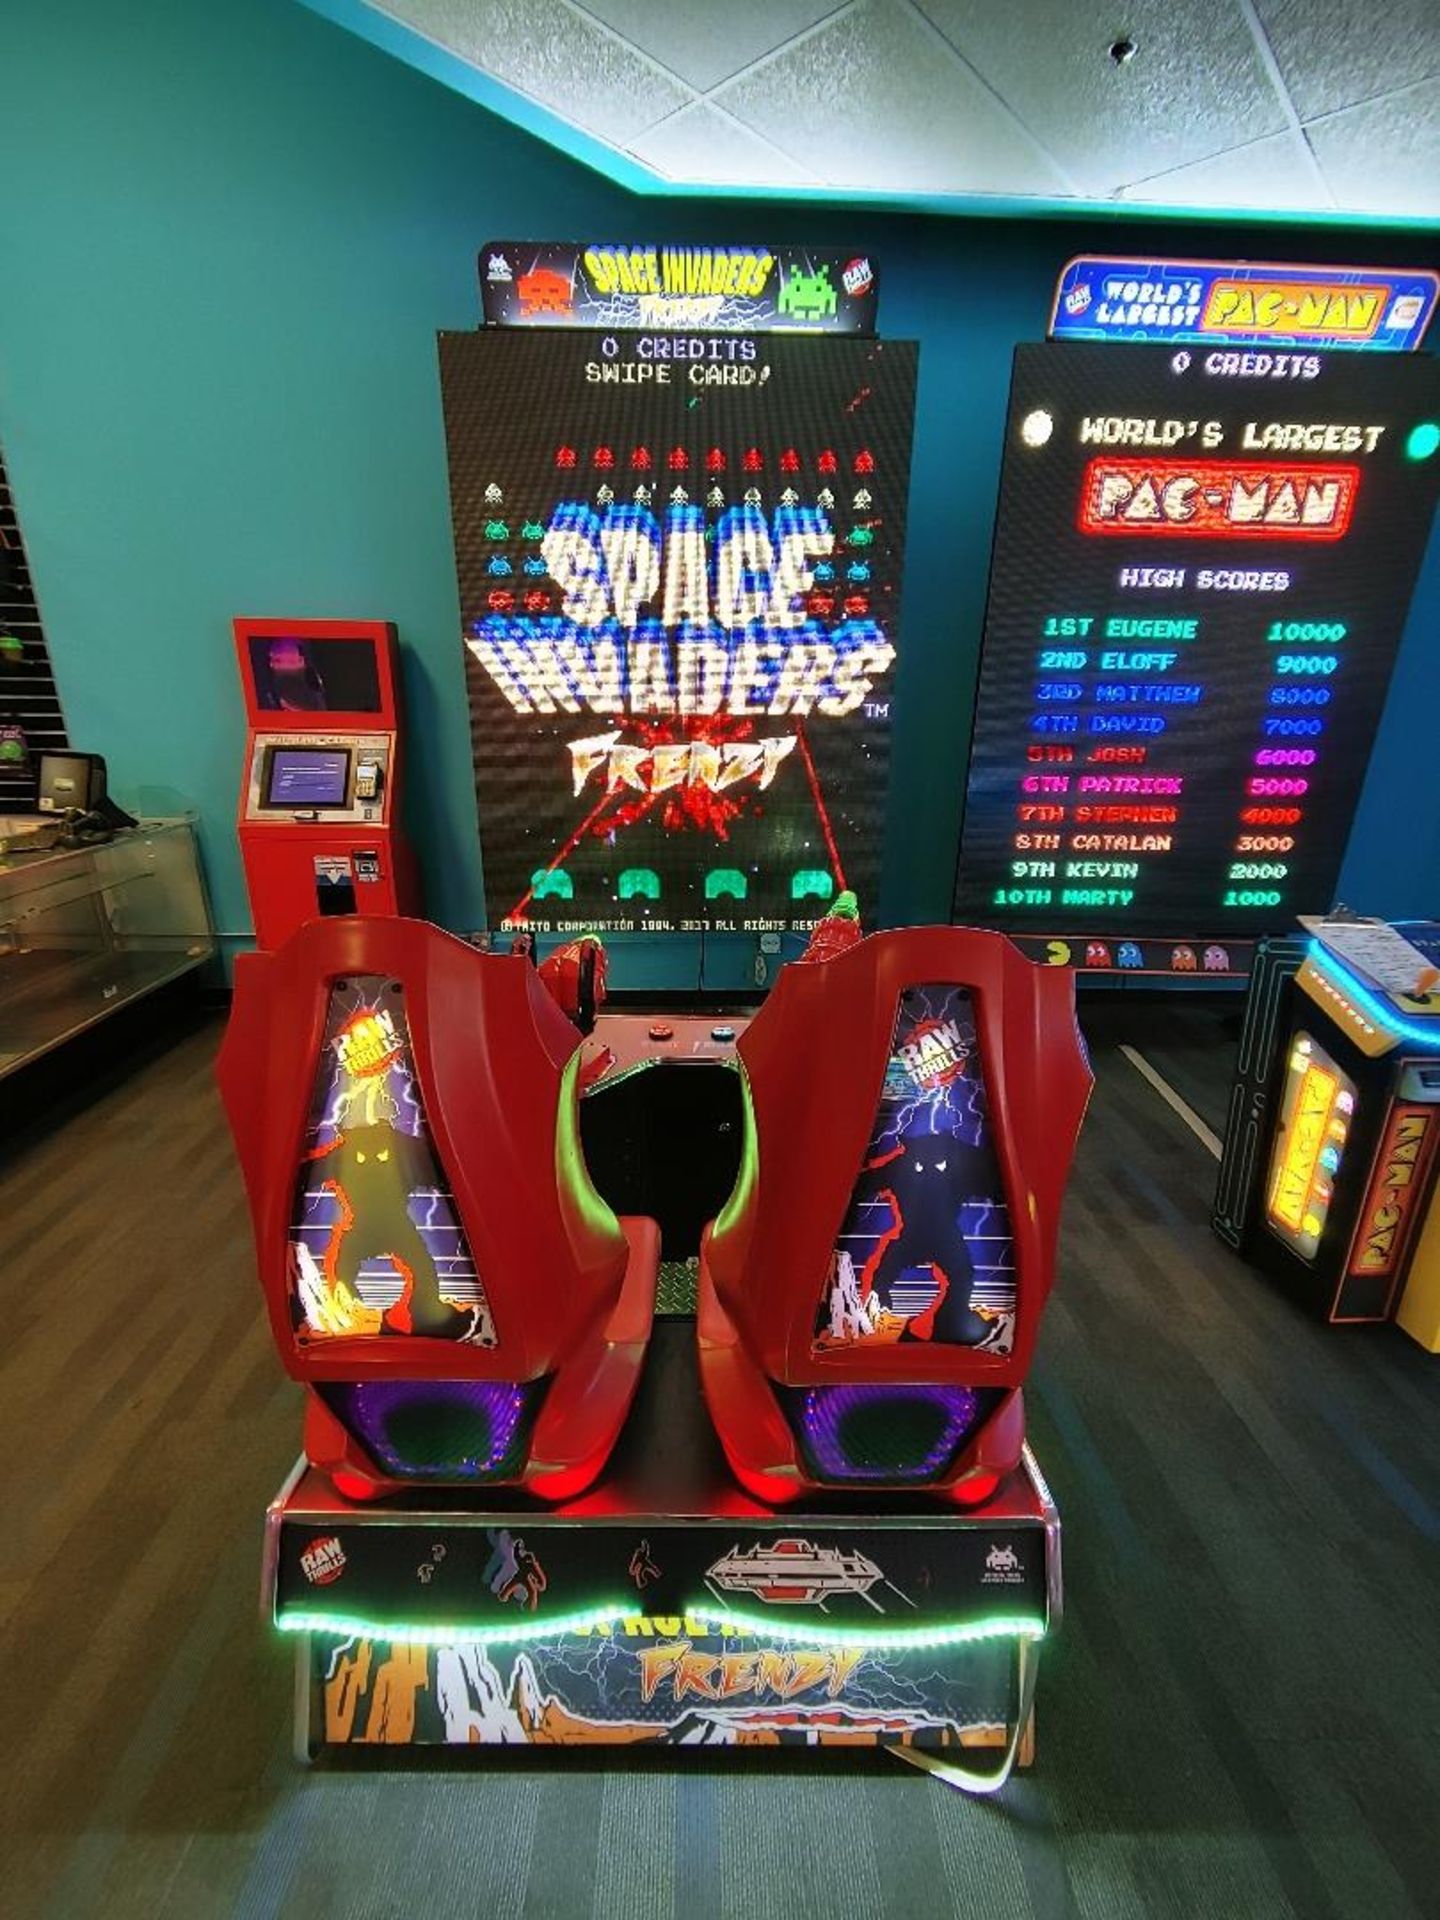 RAW THRILLS INC. SPACE INVADERS FRENZY 2 PLAYER ARCADE GAME